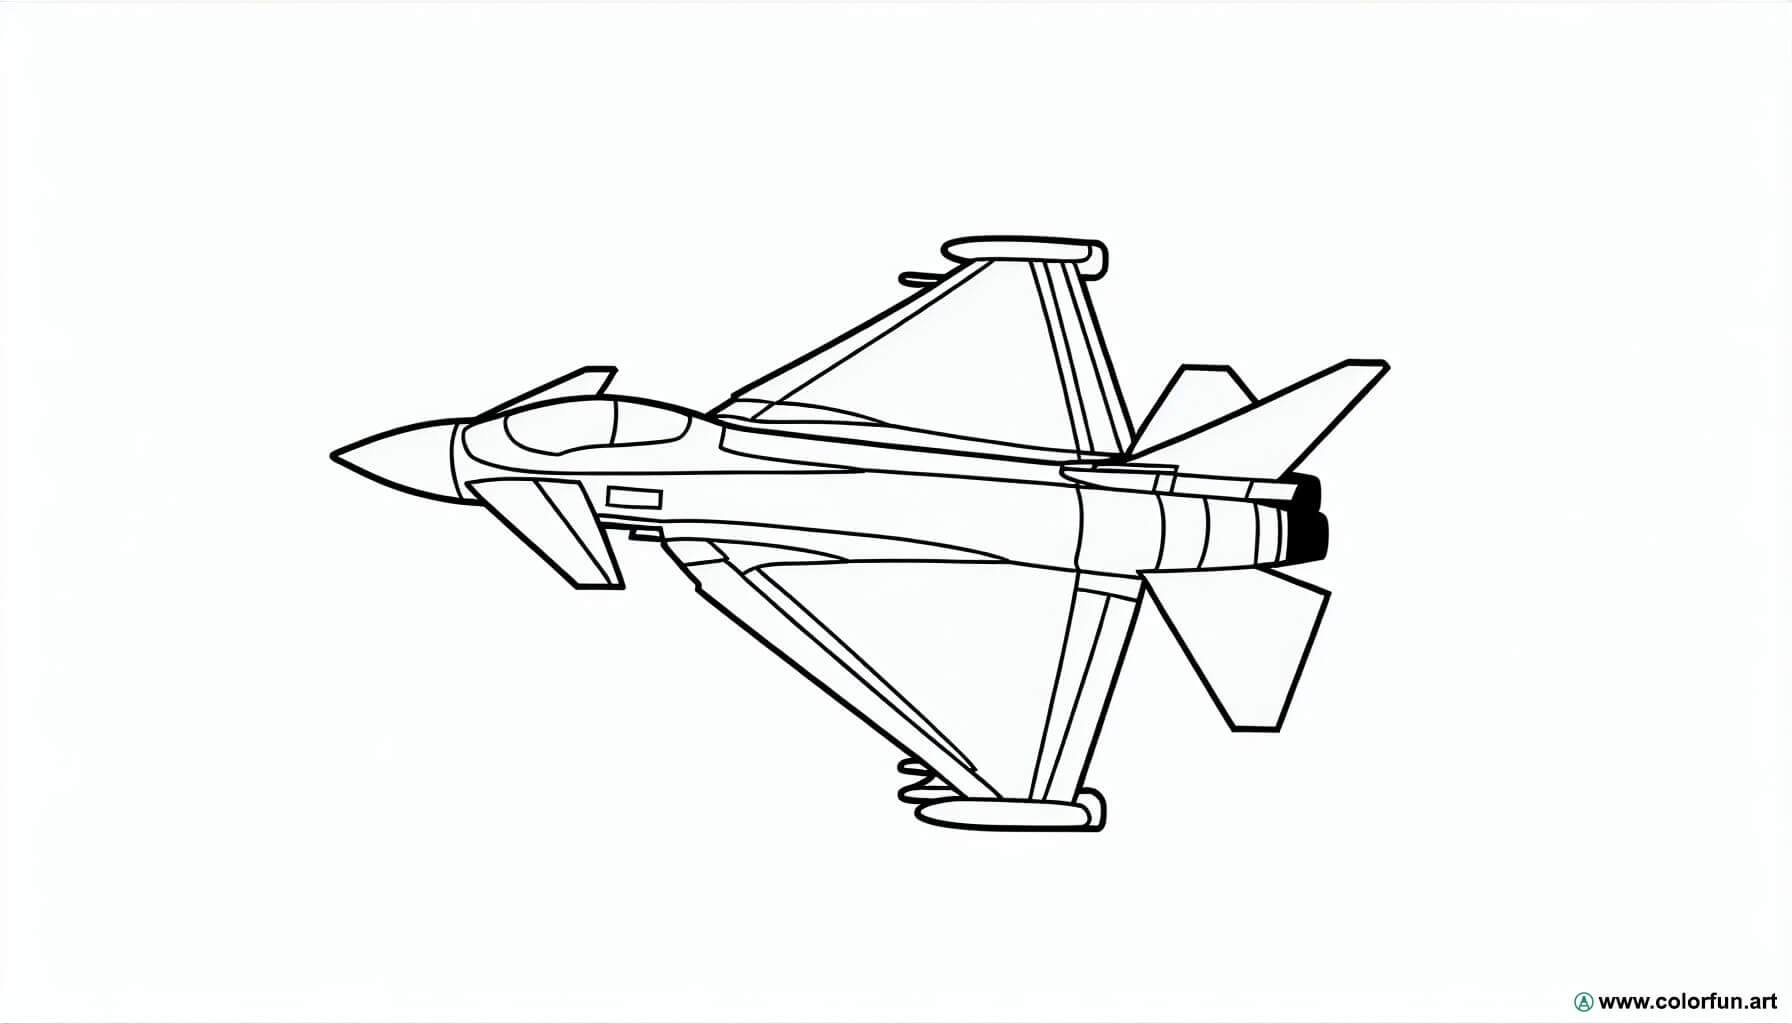 coloring page military fighter jet